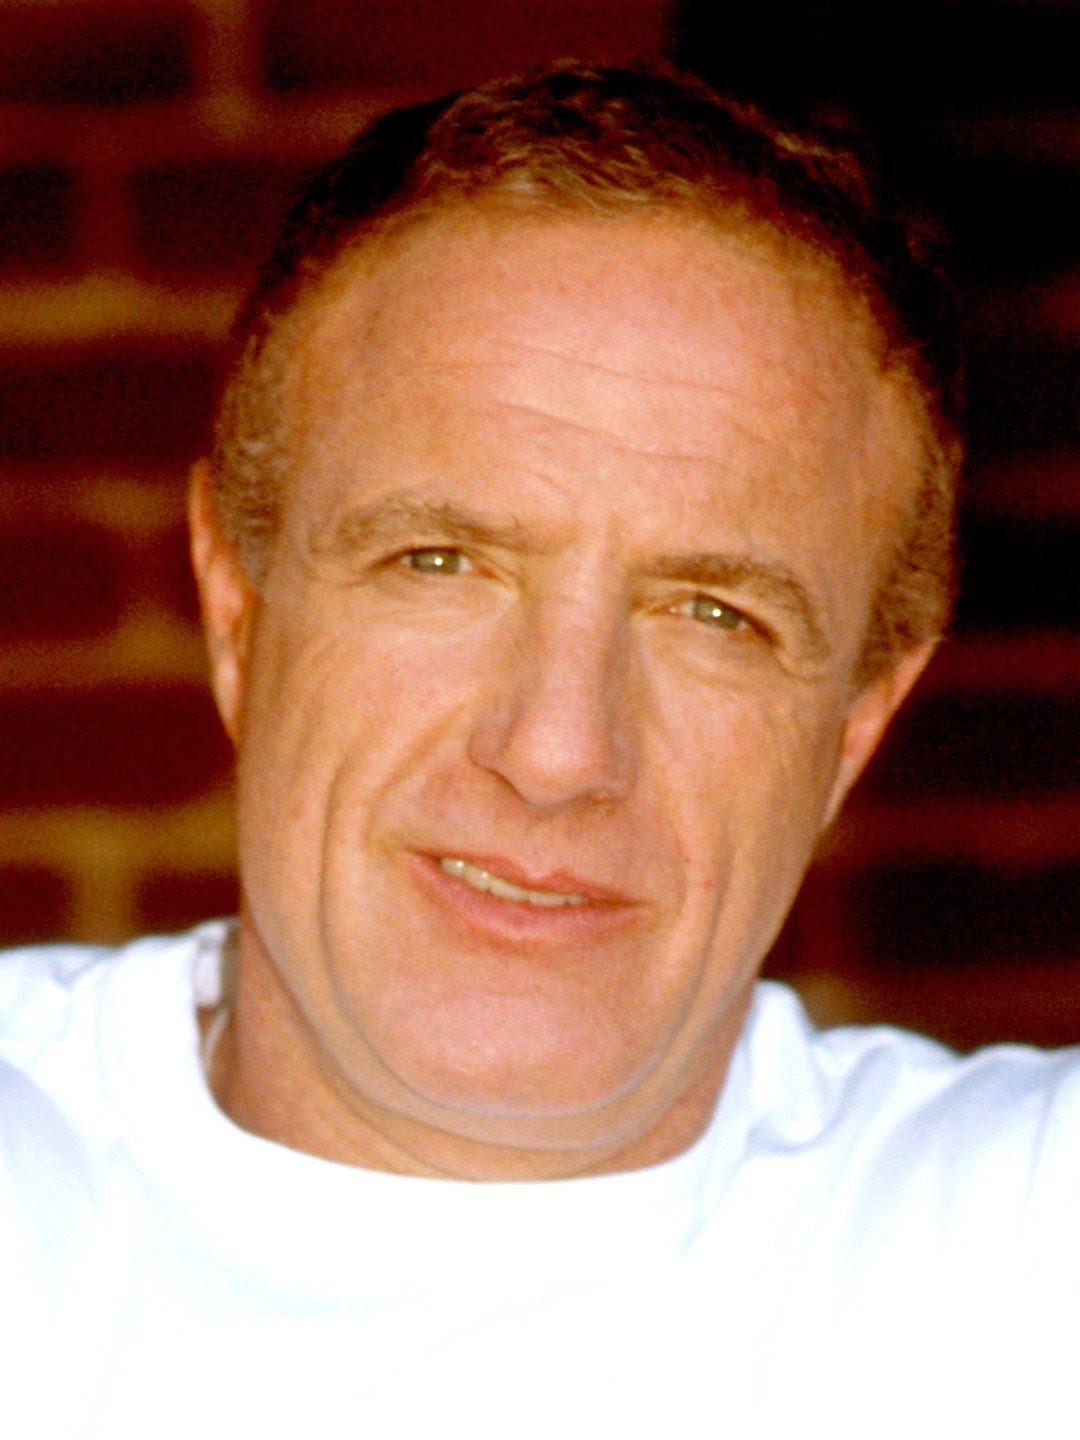 James Caan Biography: Age, Net Worth, Parents, Height, Instagram, Spouse, Children, Wiki, Movies, Awards, Death